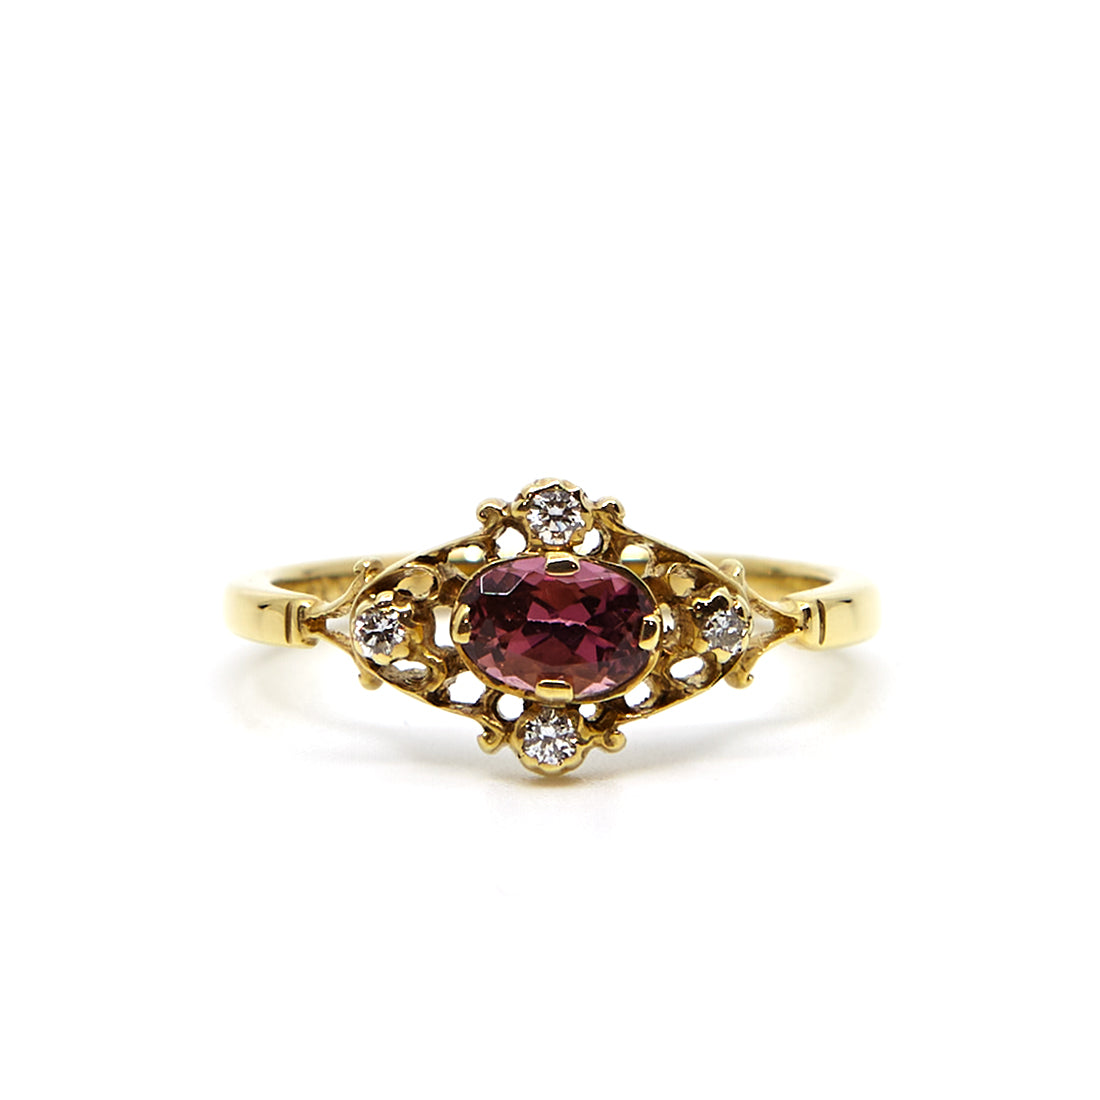 Yellow gold ring with tourmaline and diamond. 